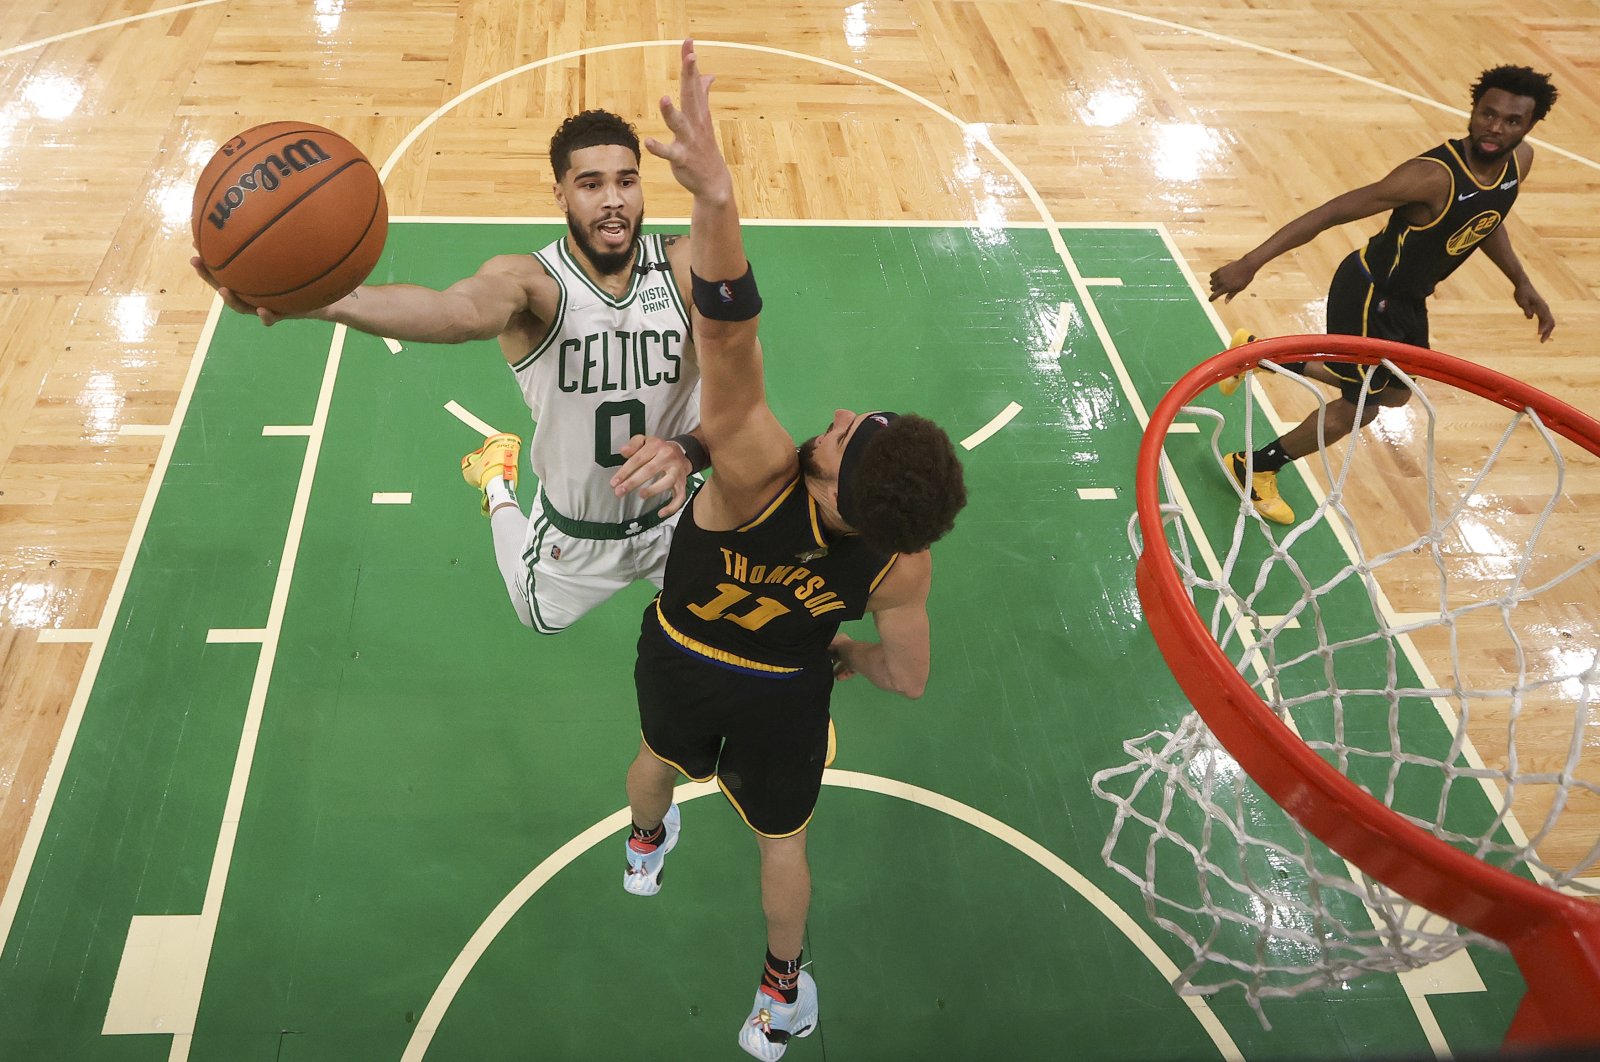 Boston Celtics forward Jayson Tatum (L) goes up for a shot against Golden State Warriors guard Klay Thompson during Game 4 of NBA Finals, Friday, June 10, 2022, in Boston. (AP Photo)